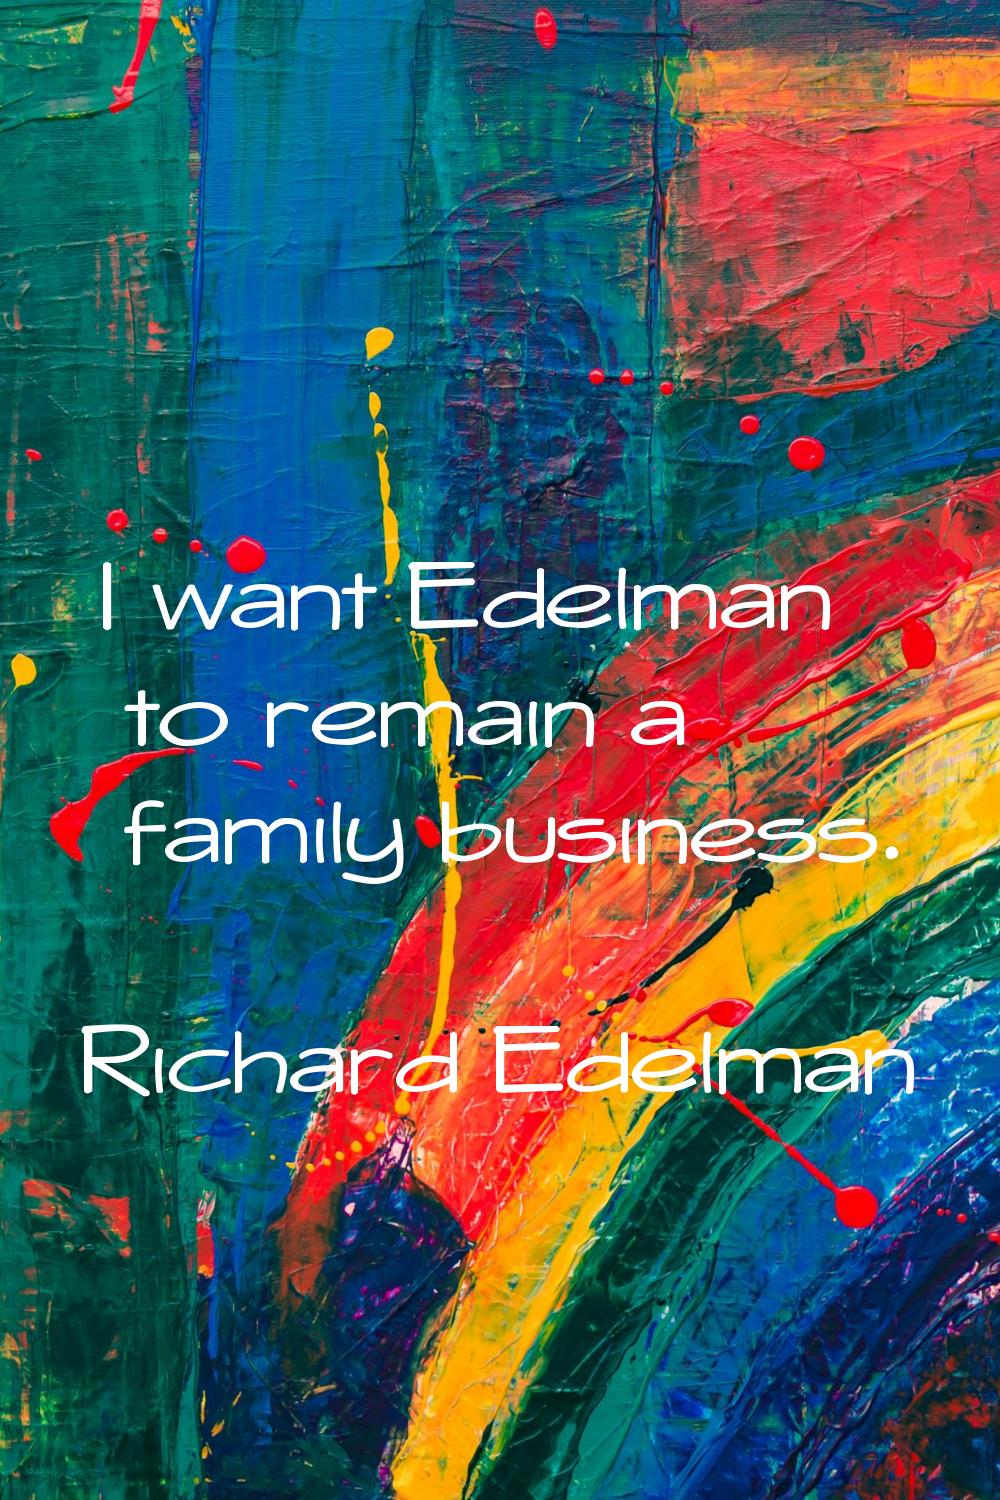 I want Edelman to remain a family business.